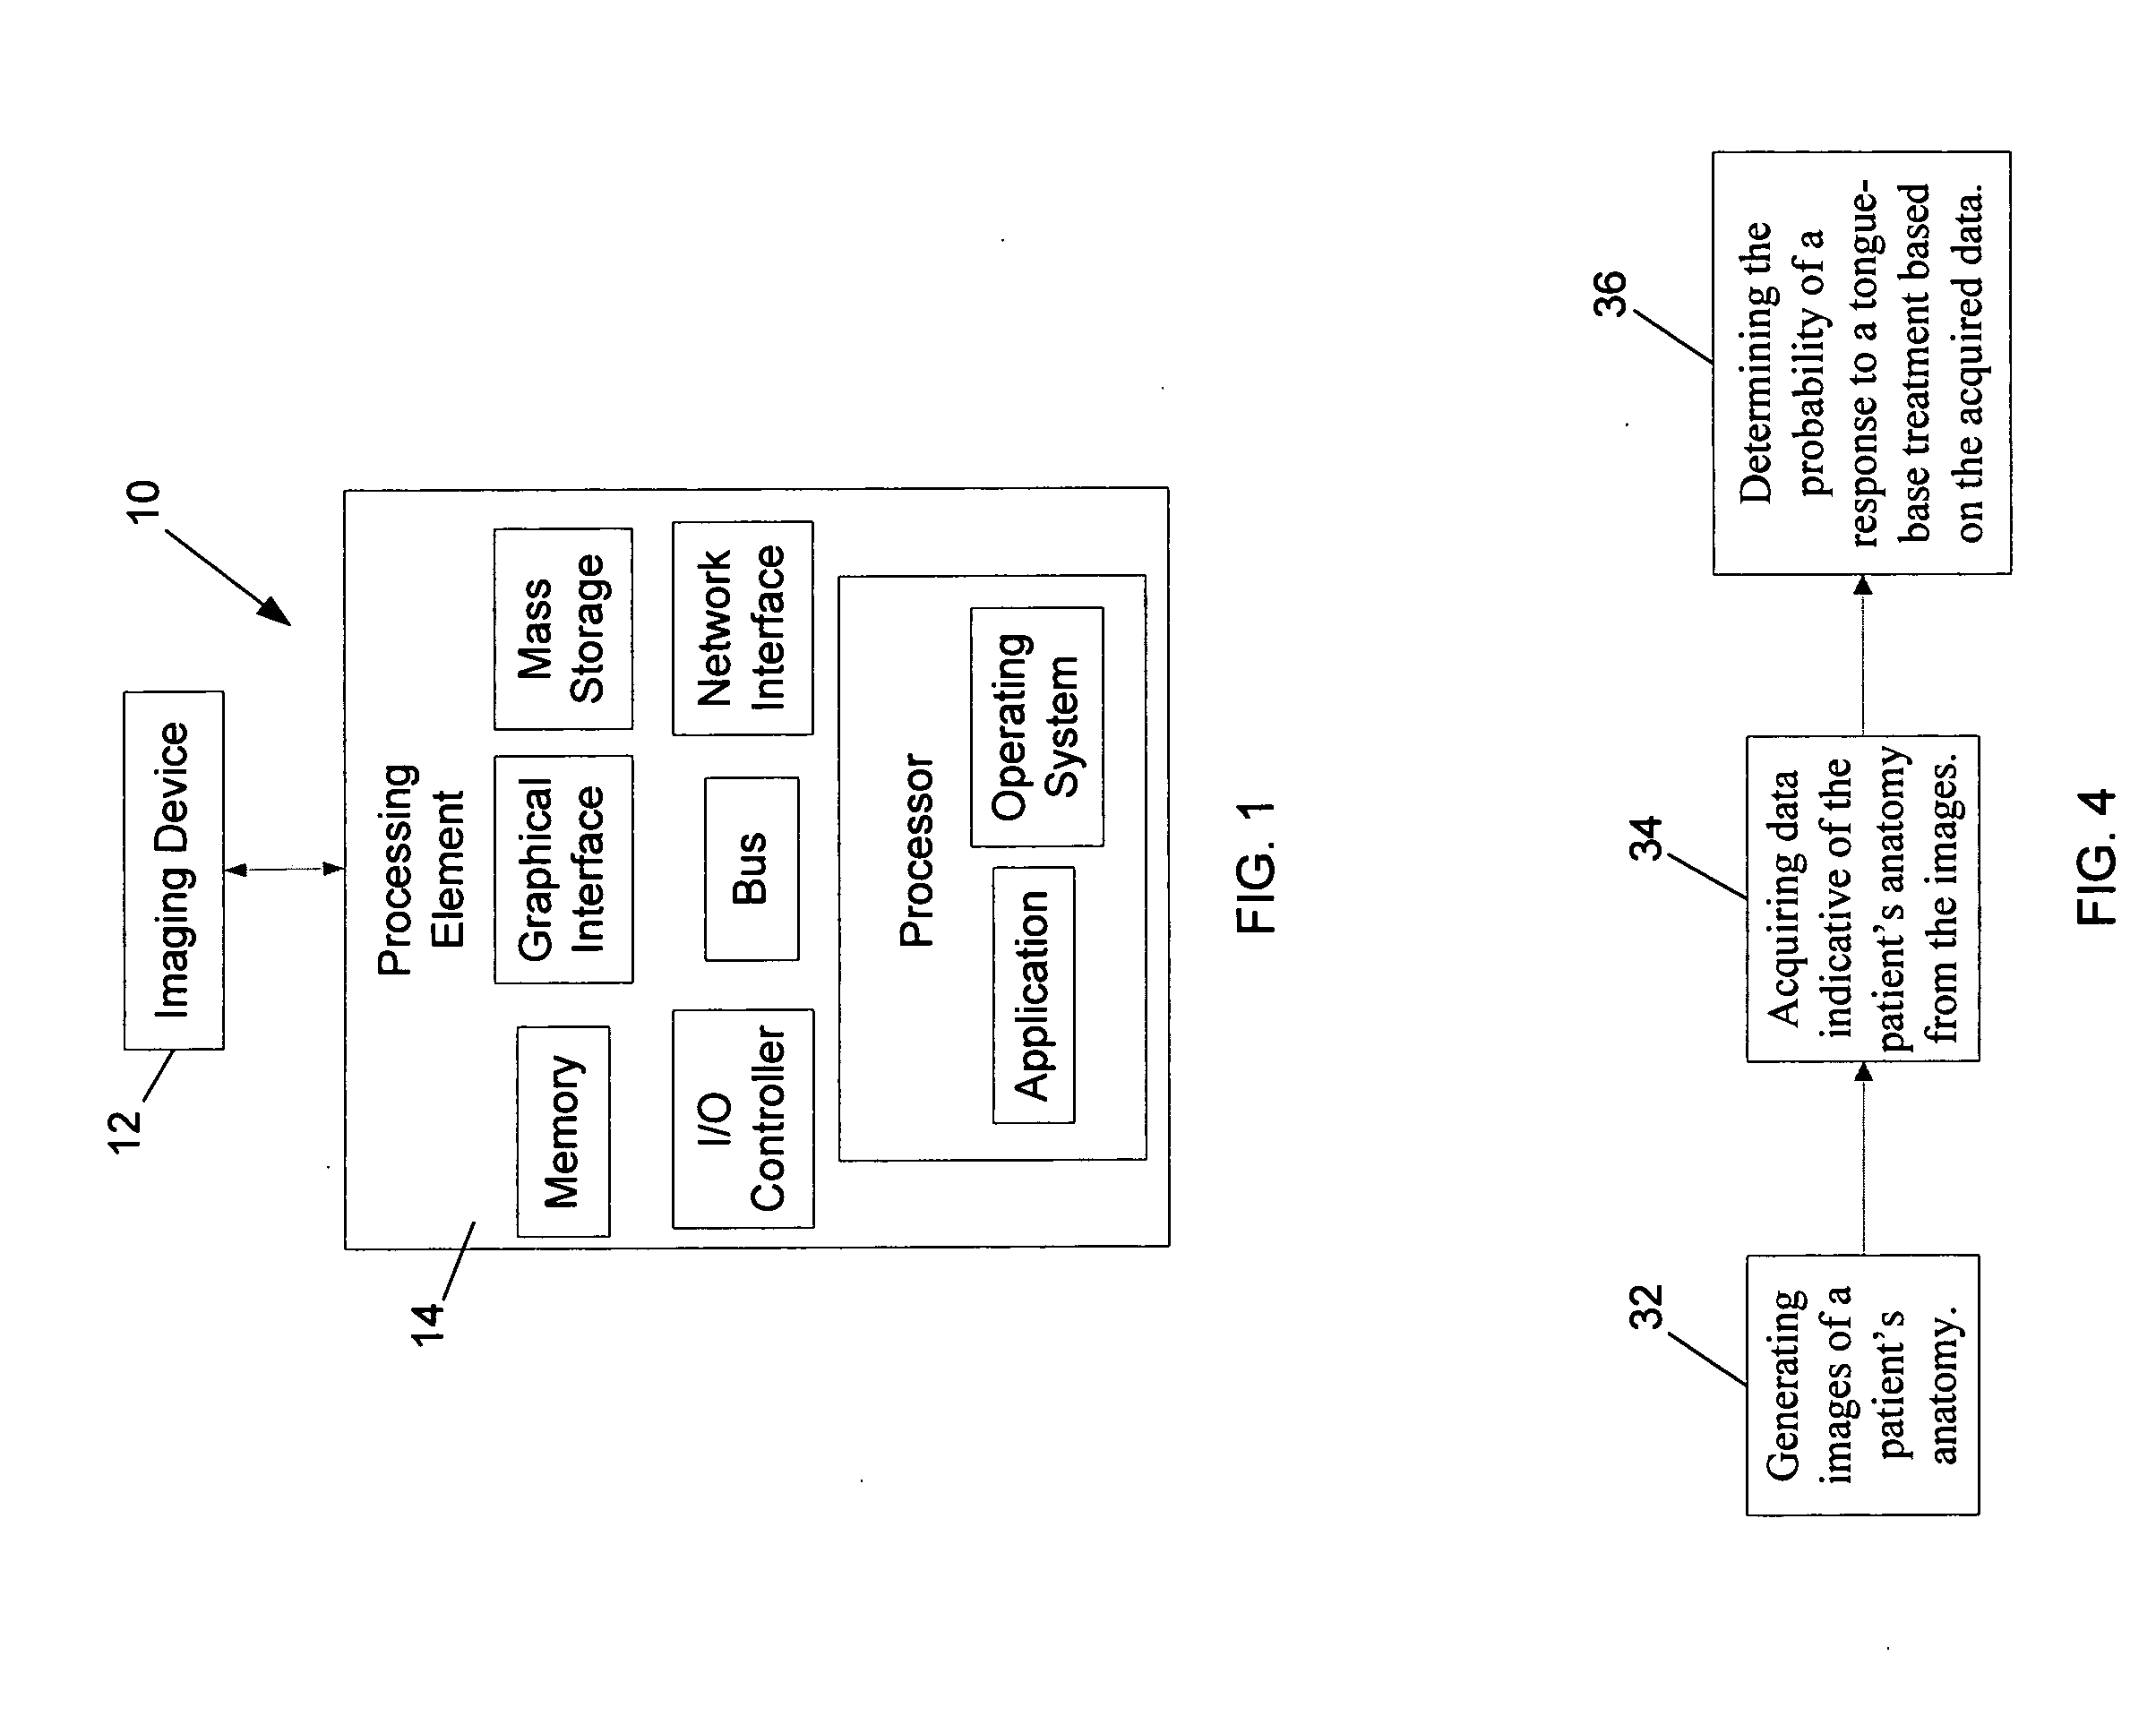 System and method of predicting efficacy of tongue-base therapies